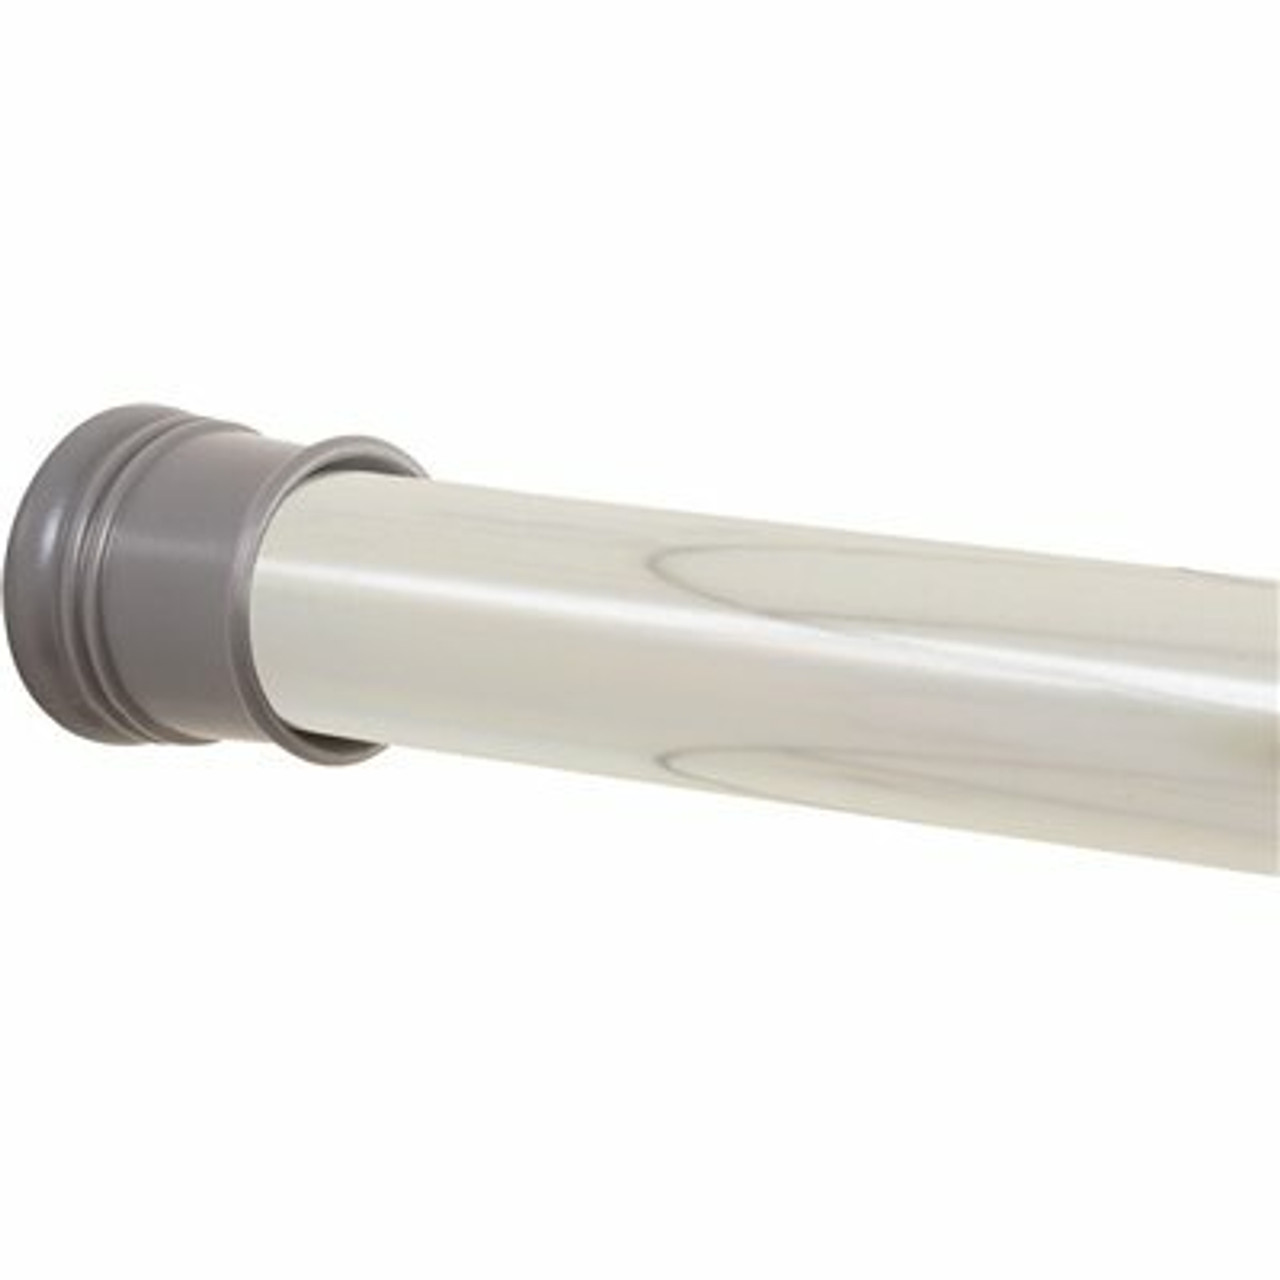 Proplus 44 In. To 72 In. Adjustable Tension Shower Rod In Chrome